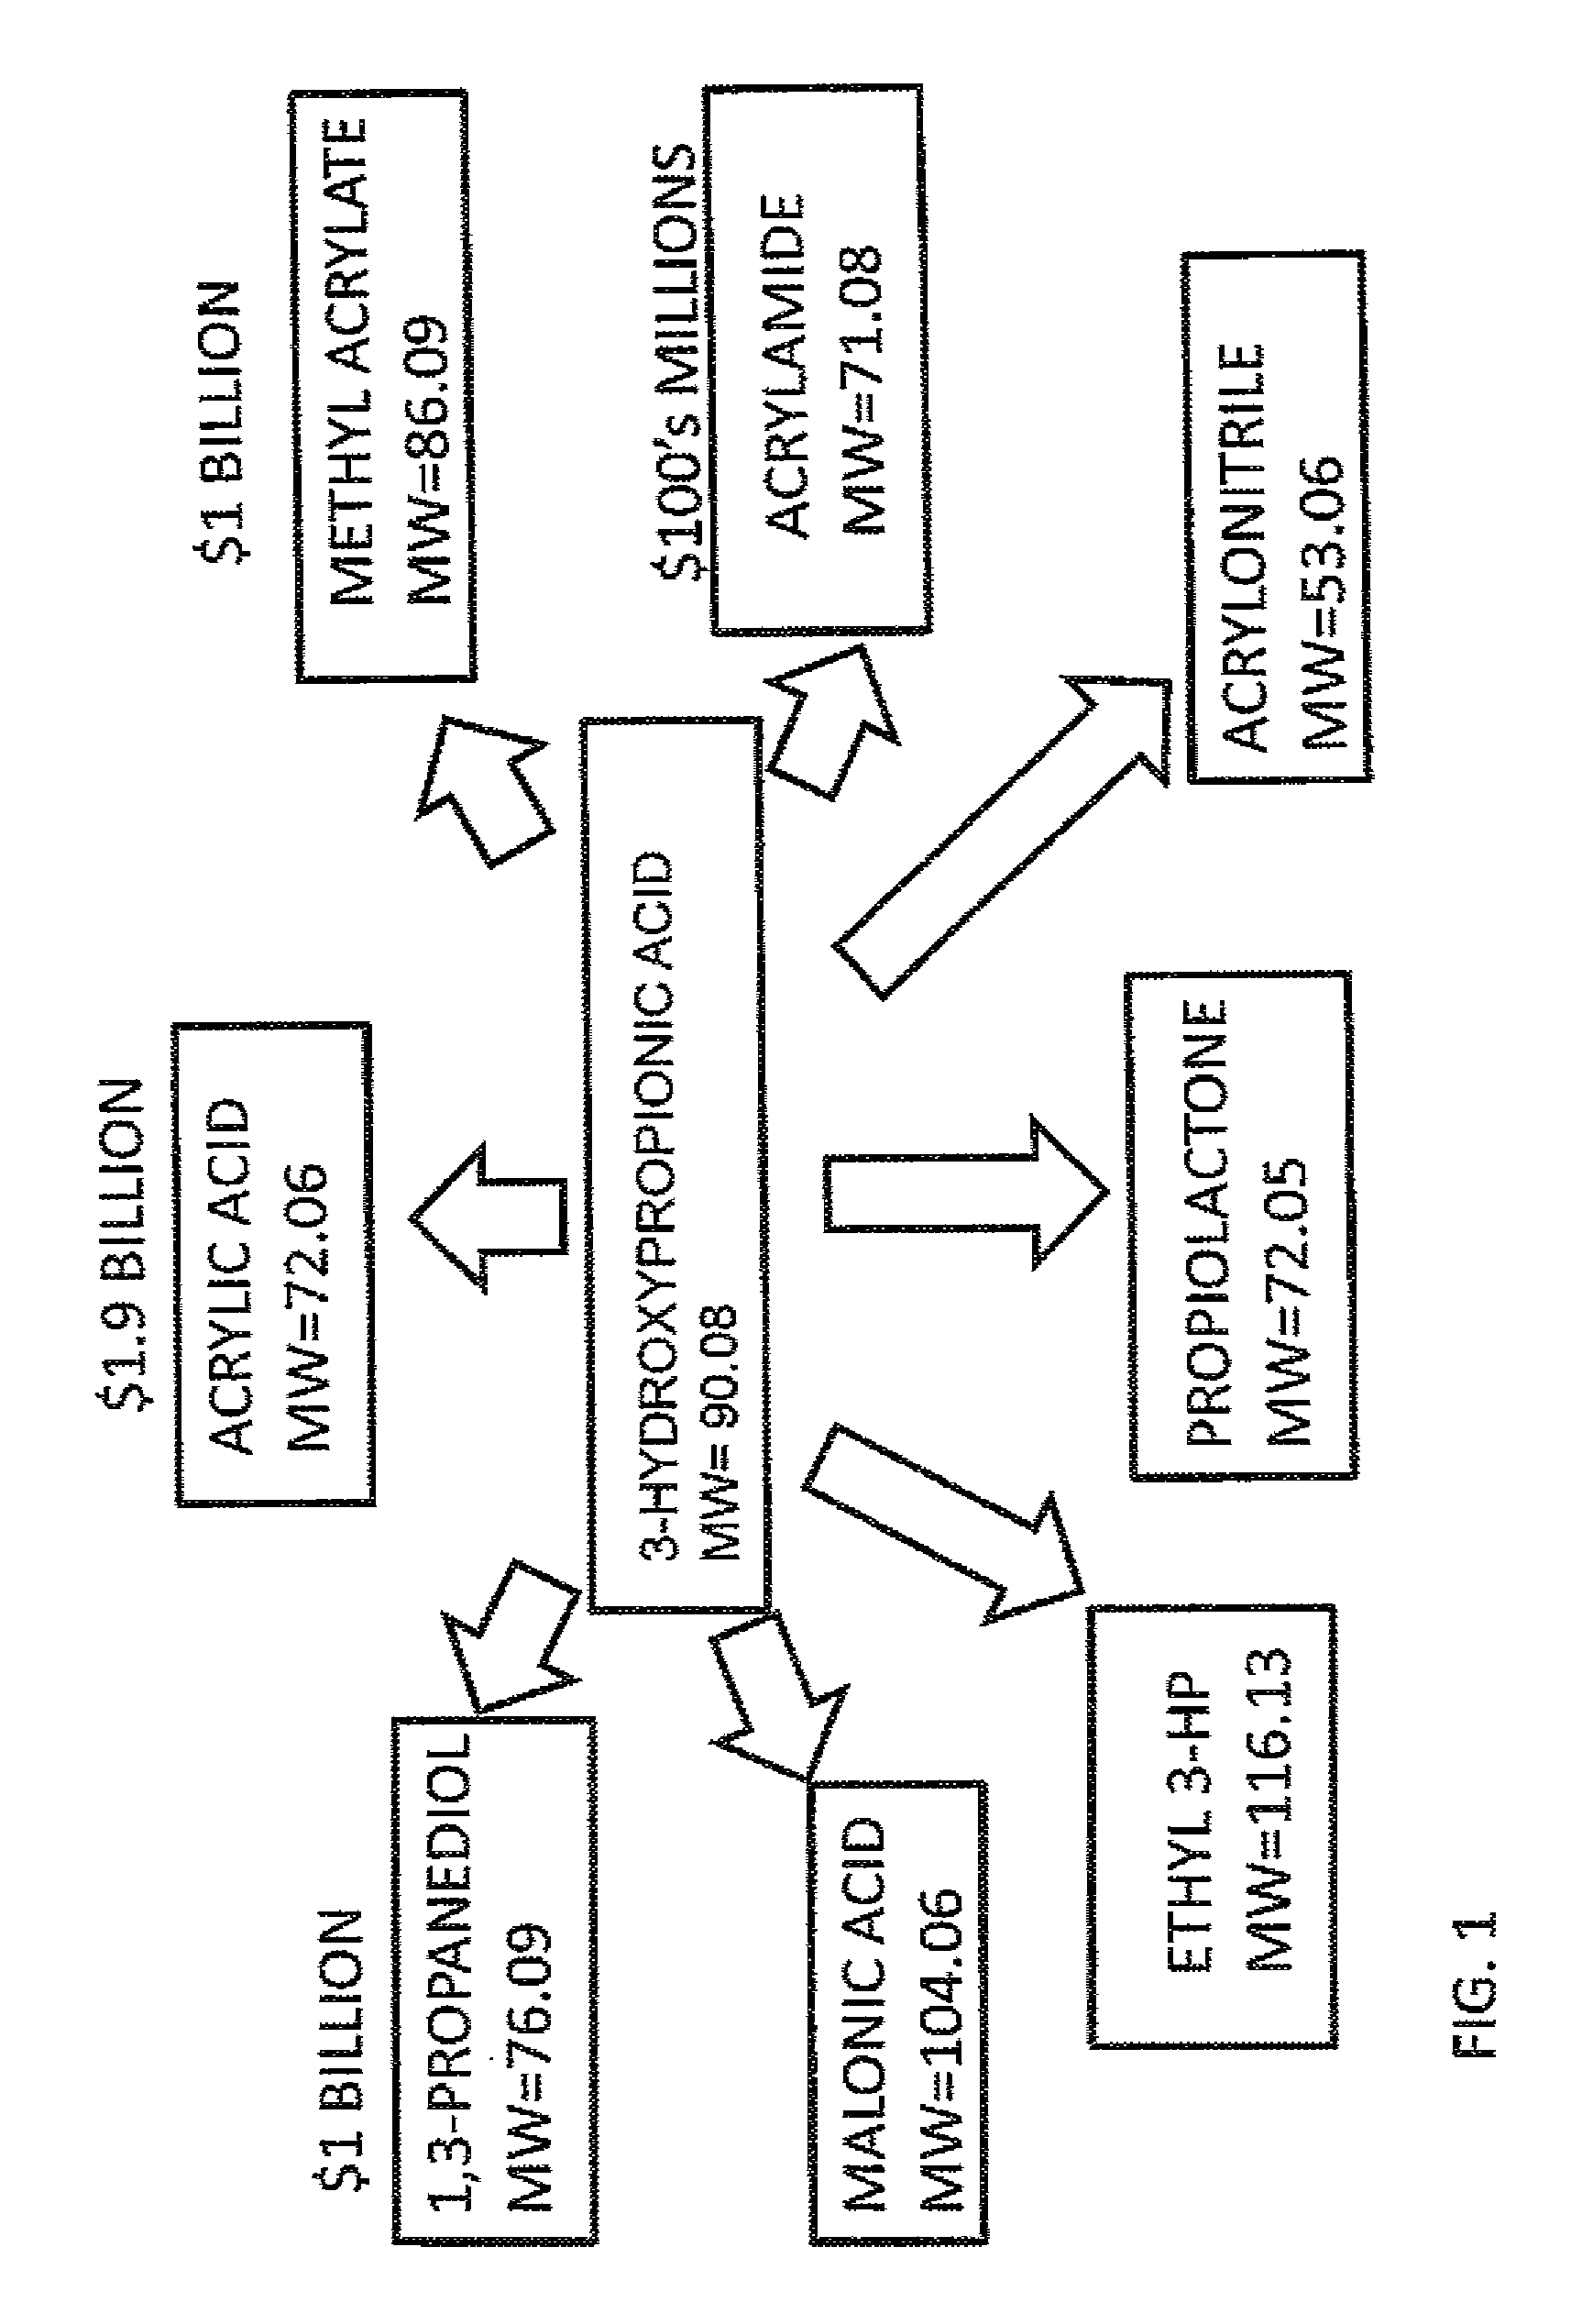 Compositions and methods for 3-hydroxypropionate bio-production from biomass